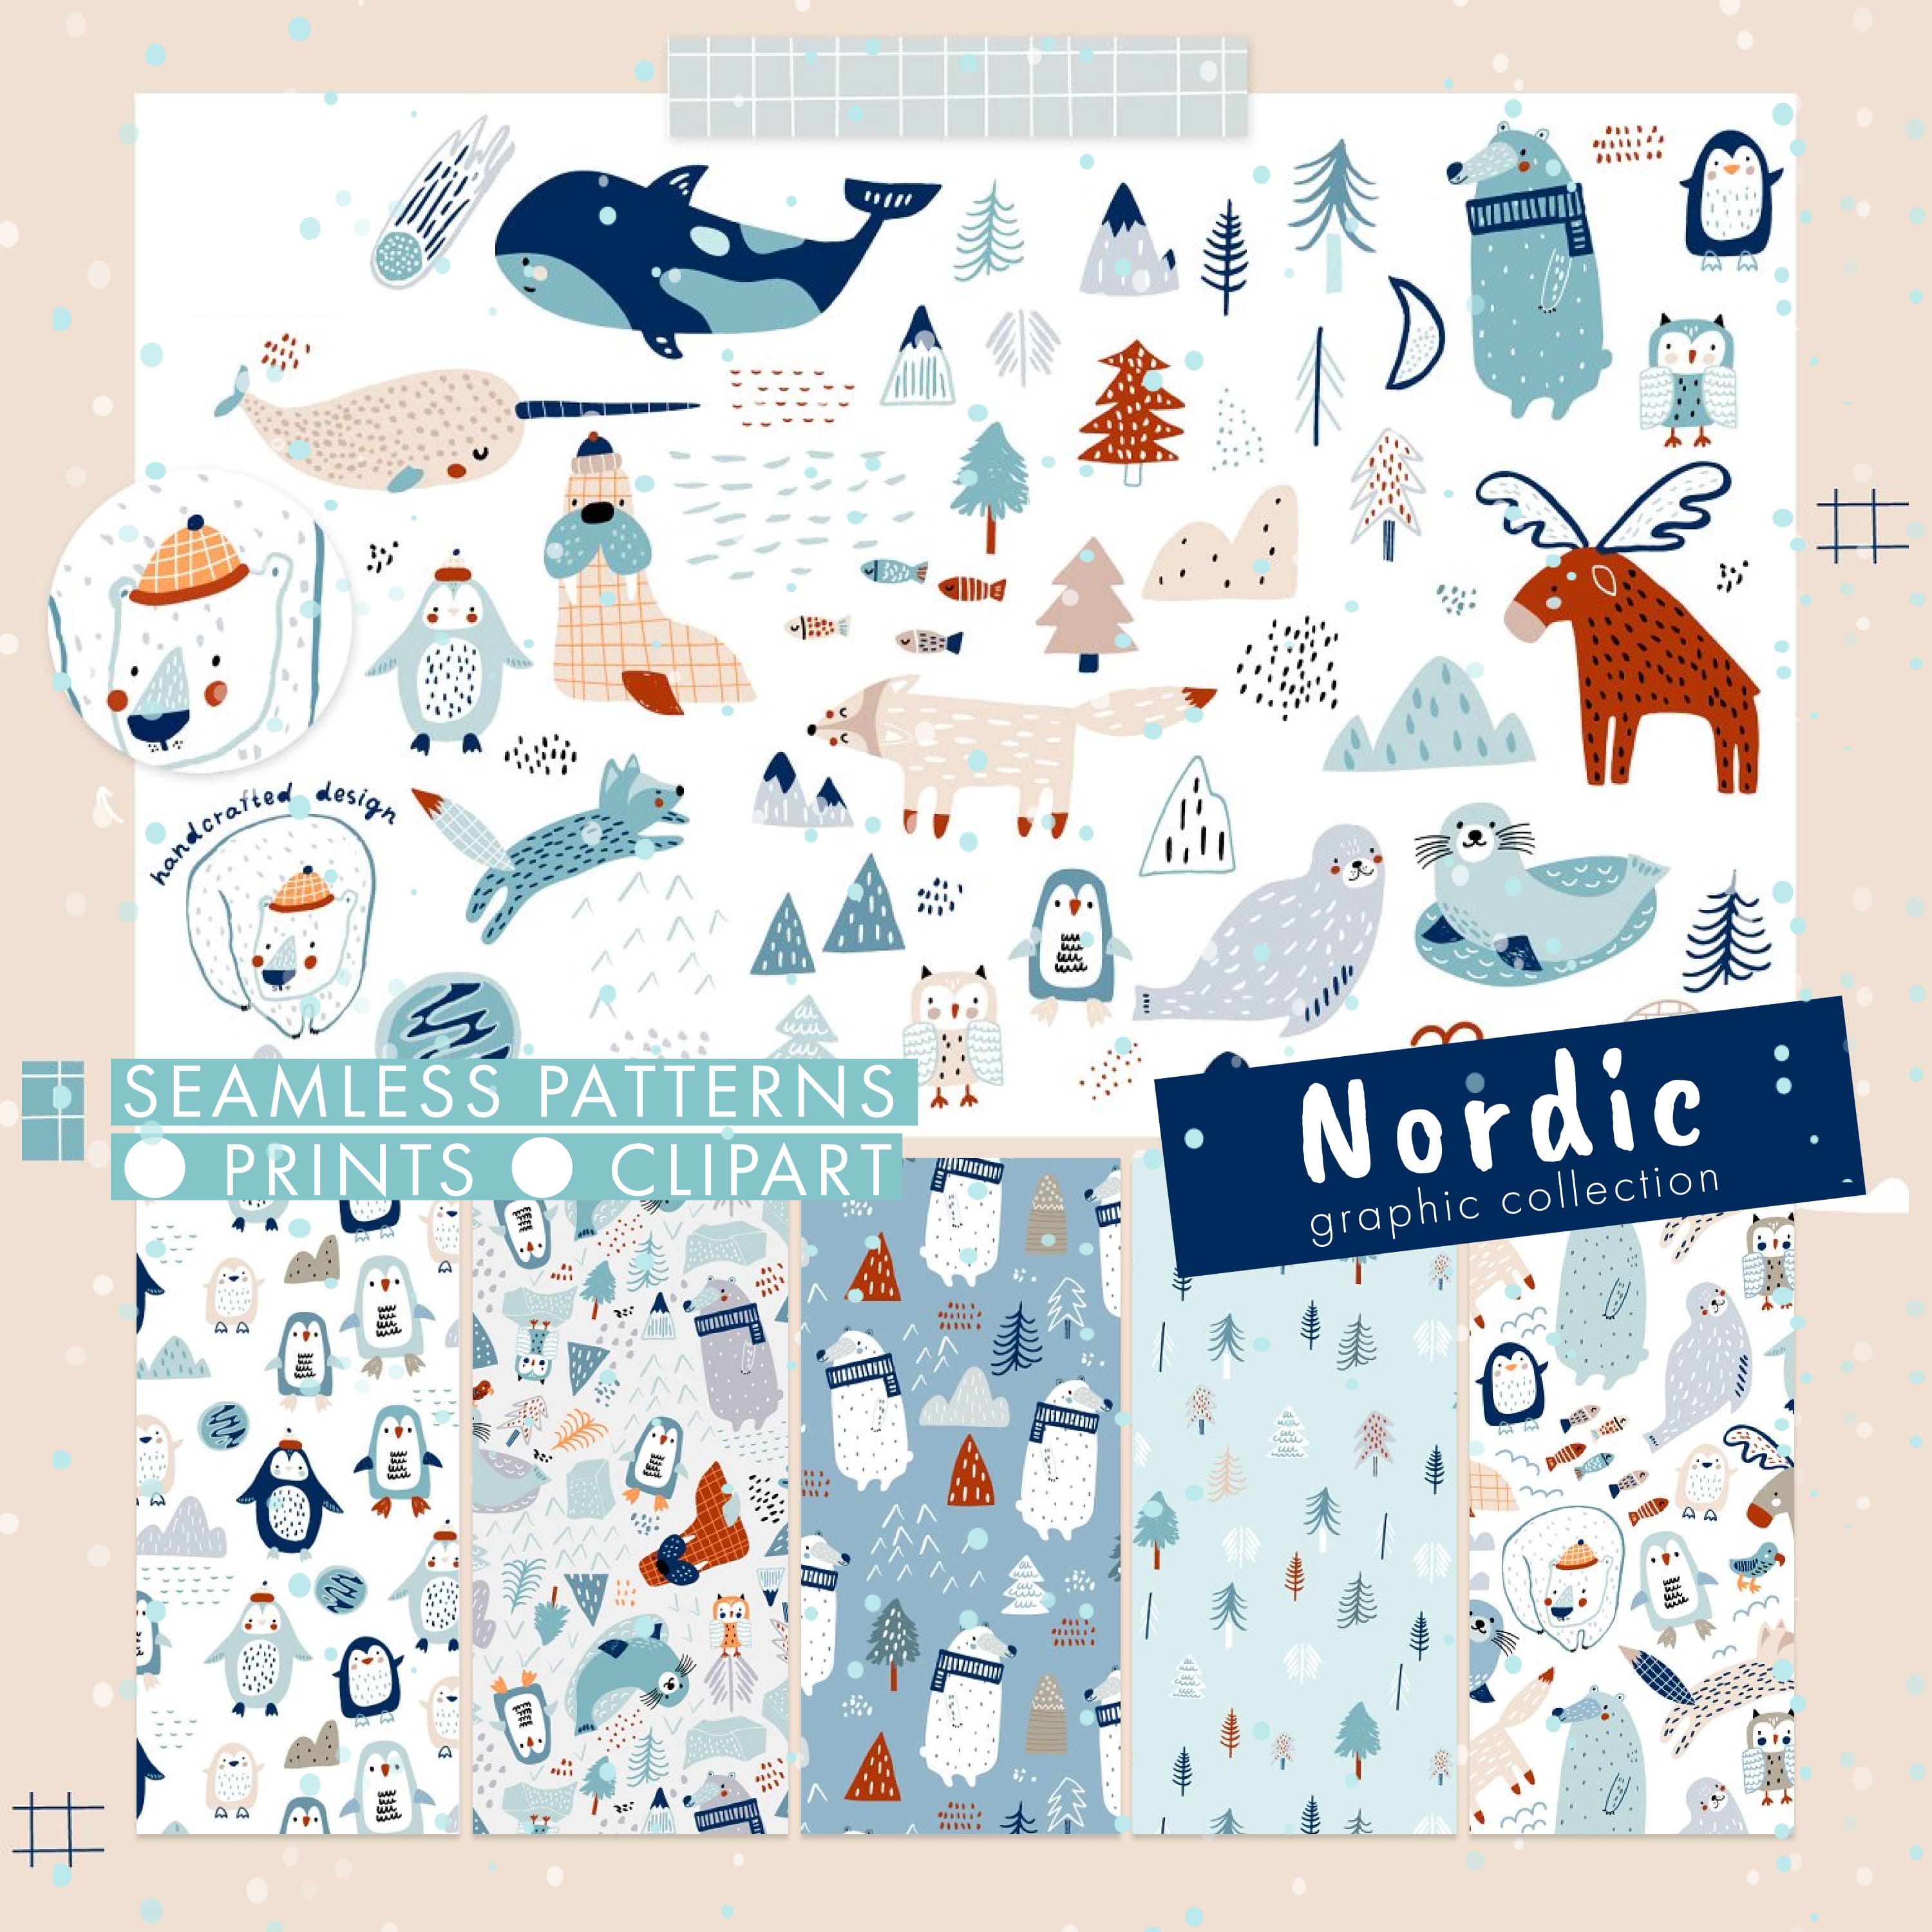 Nordic. Graphic collection cover.